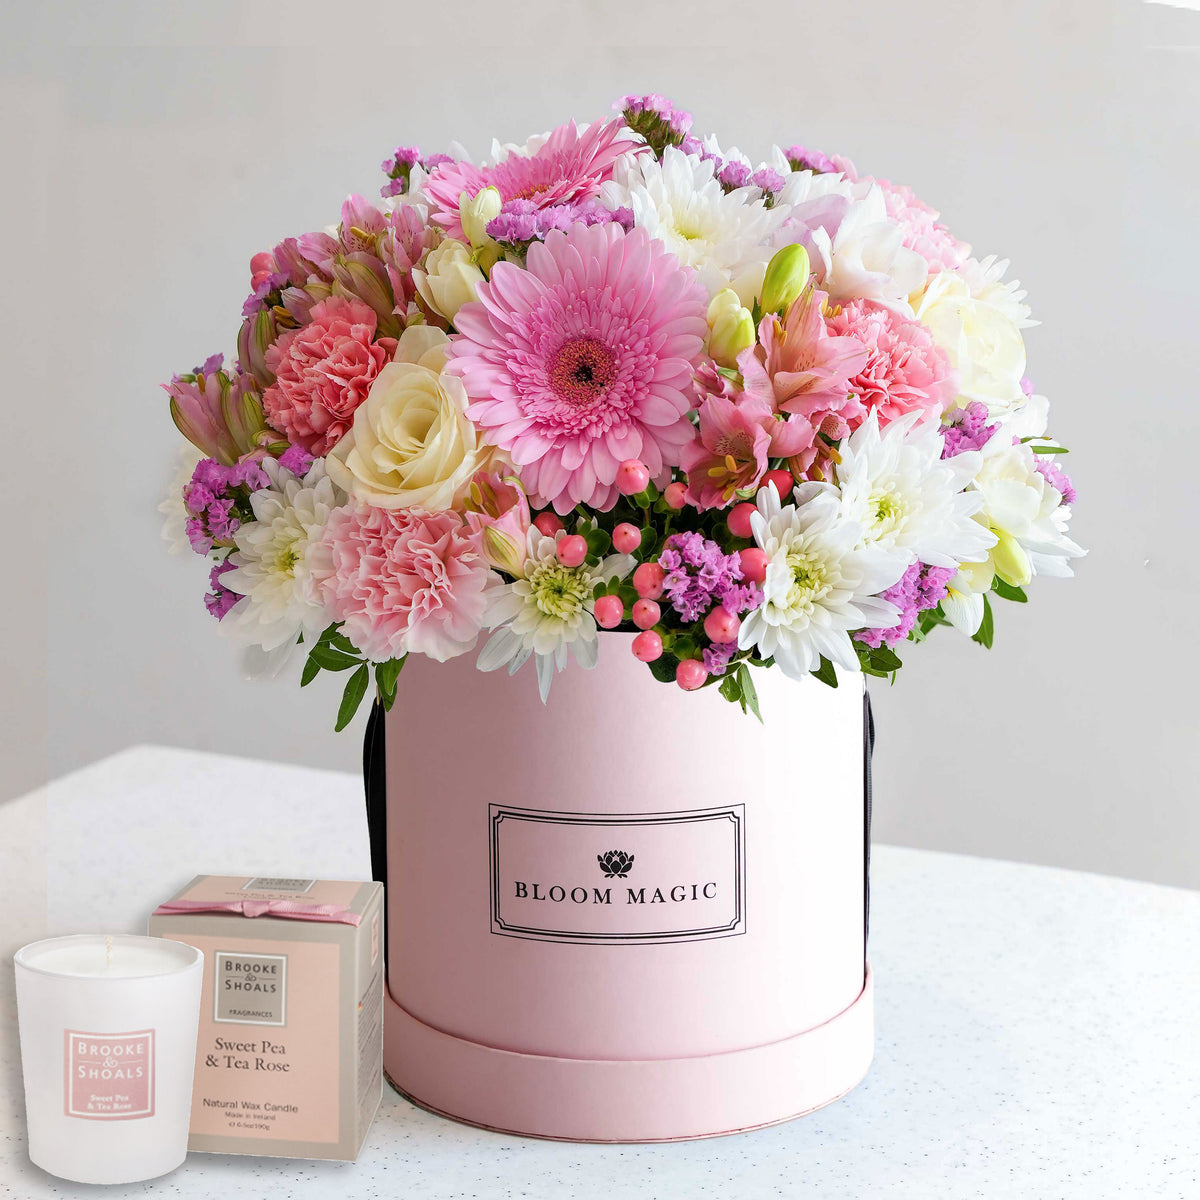 Avenue Montaigne Gift Set with Brooke &amp; Shoals Sweet Pea and Tea Rose Candle